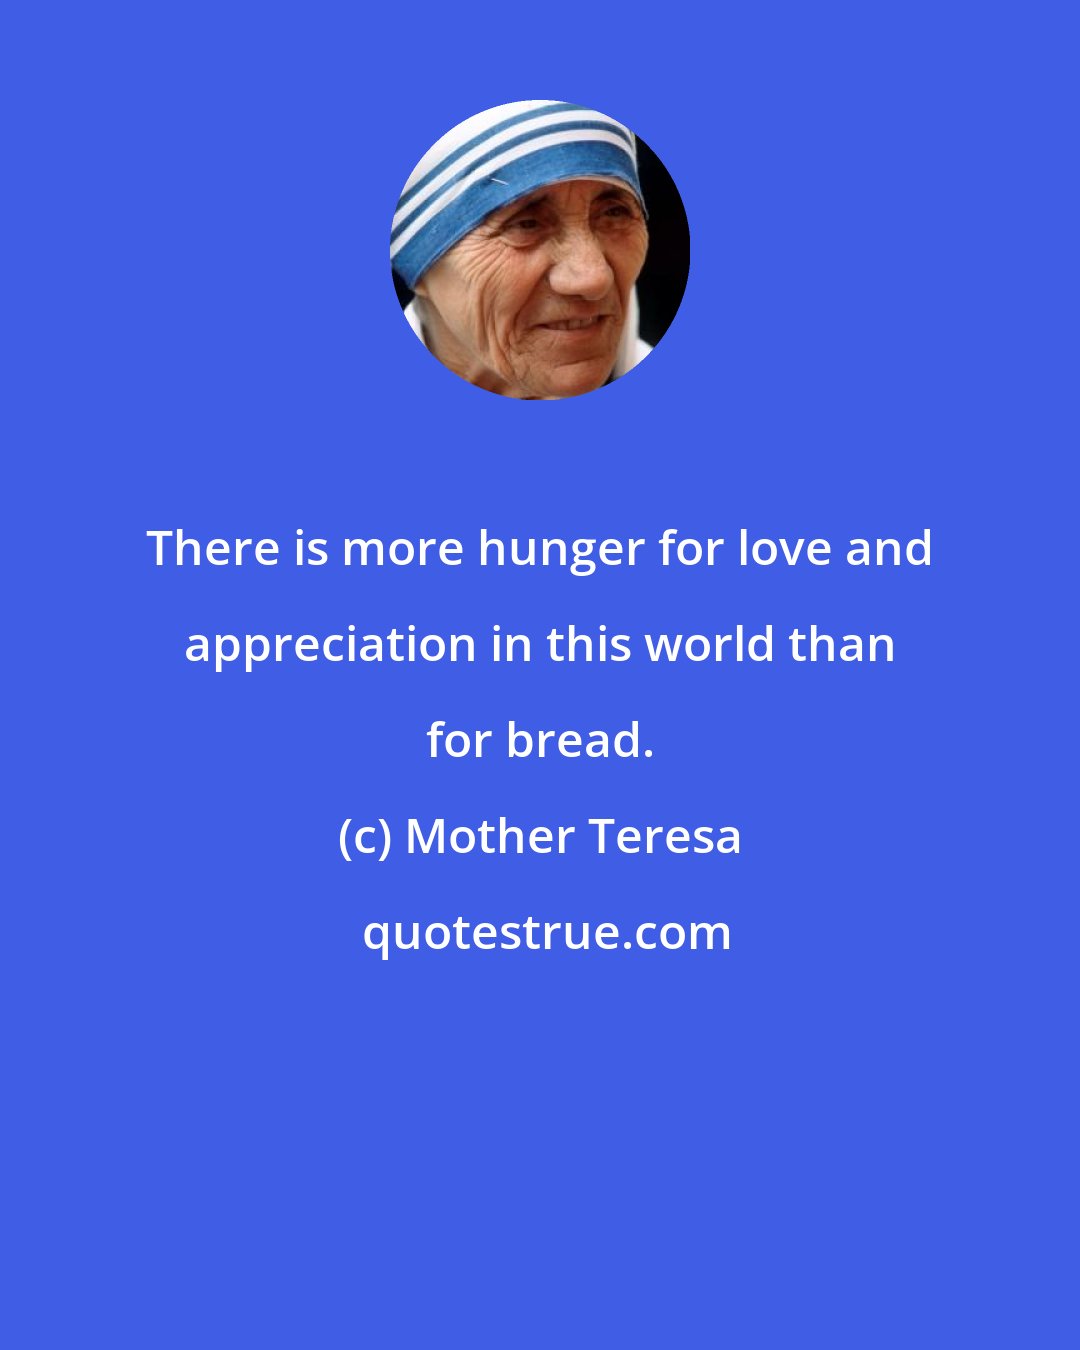 Mother Teresa: There is more hunger for love and appreciation in this world than for bread.